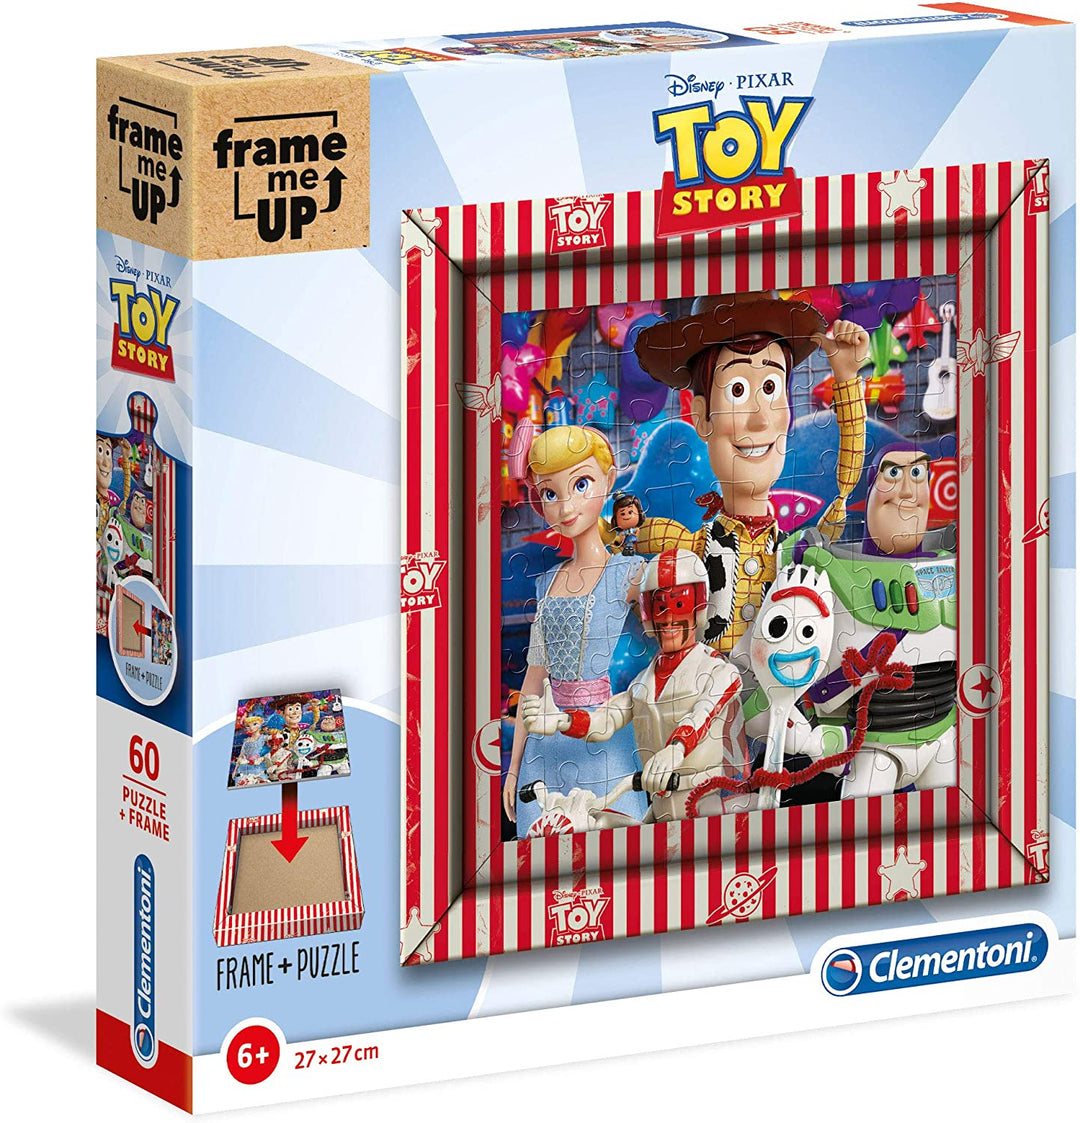 Clementoni - 38806 - Frame Me Up puzzle for children - Disney Toy Story 4 - 60 pieces - Made in Italy - Ages 6 Years Plus